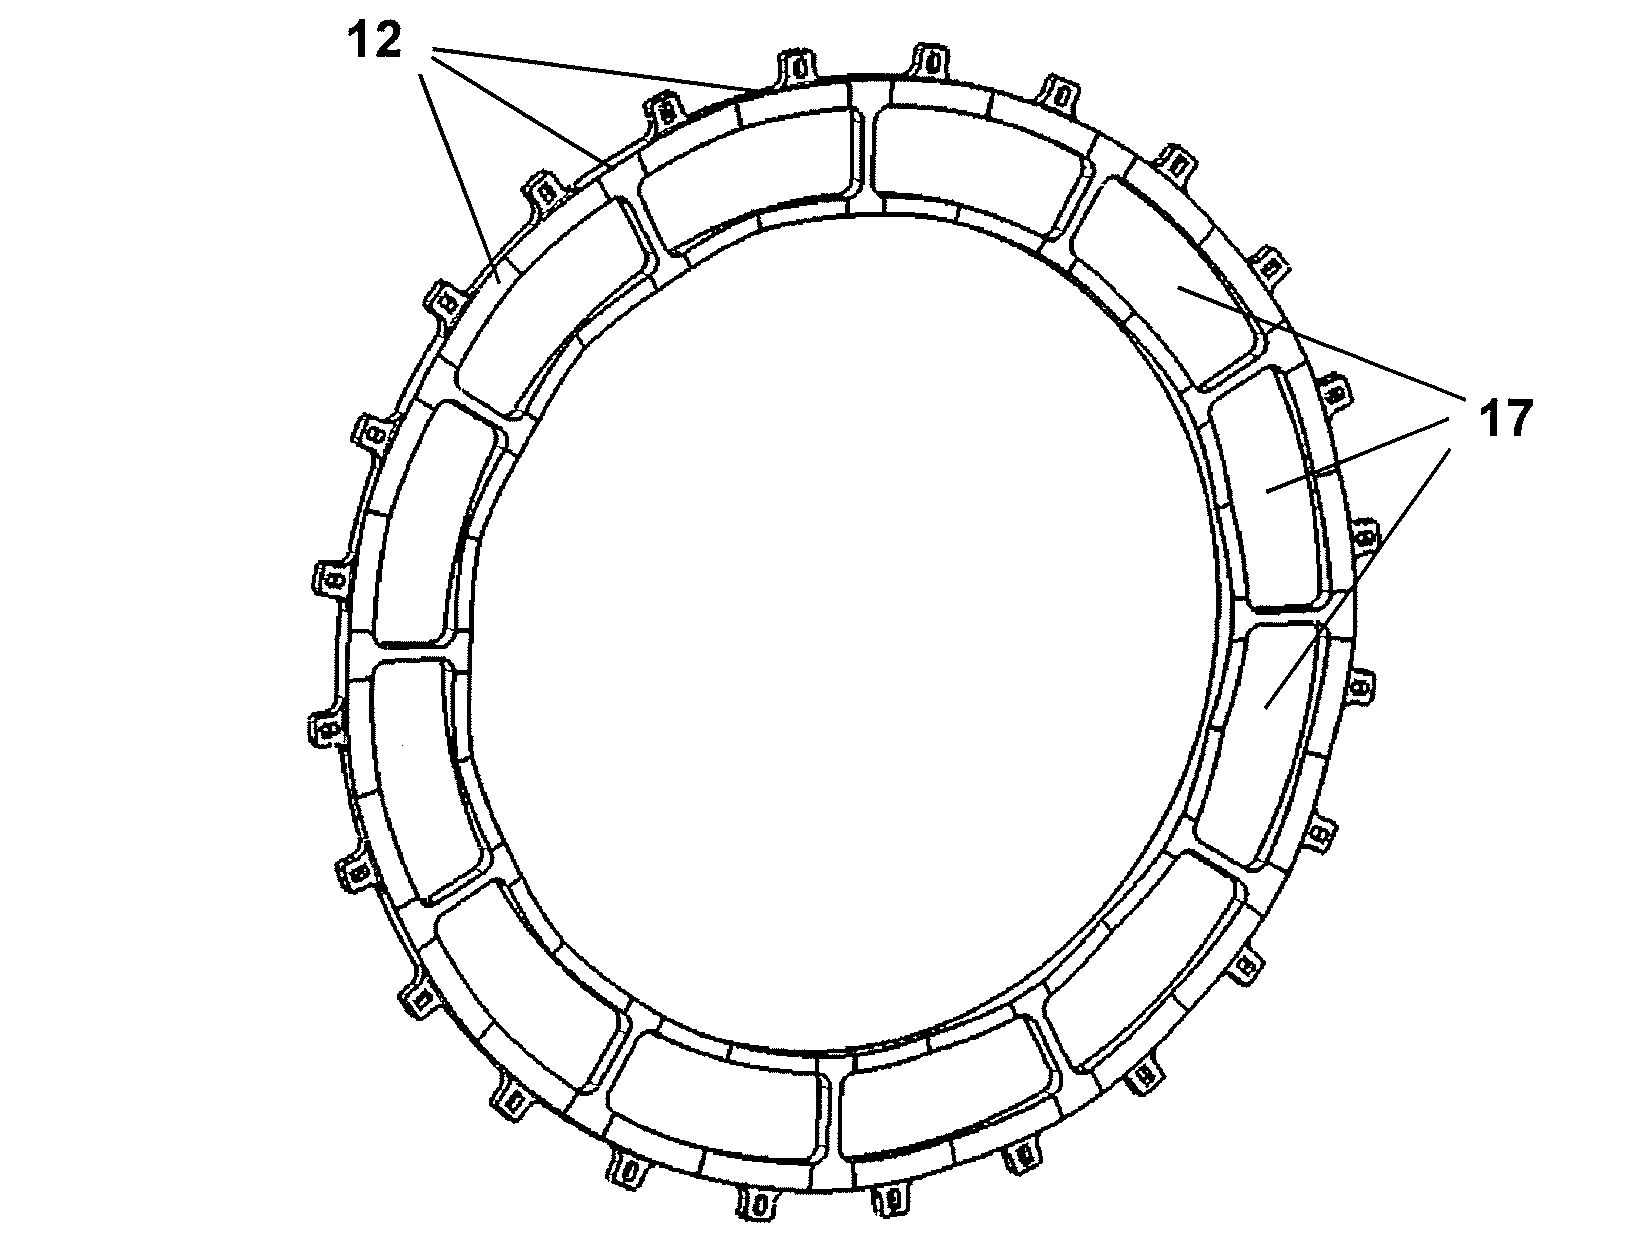 Frame segment for a combustor turbine interface